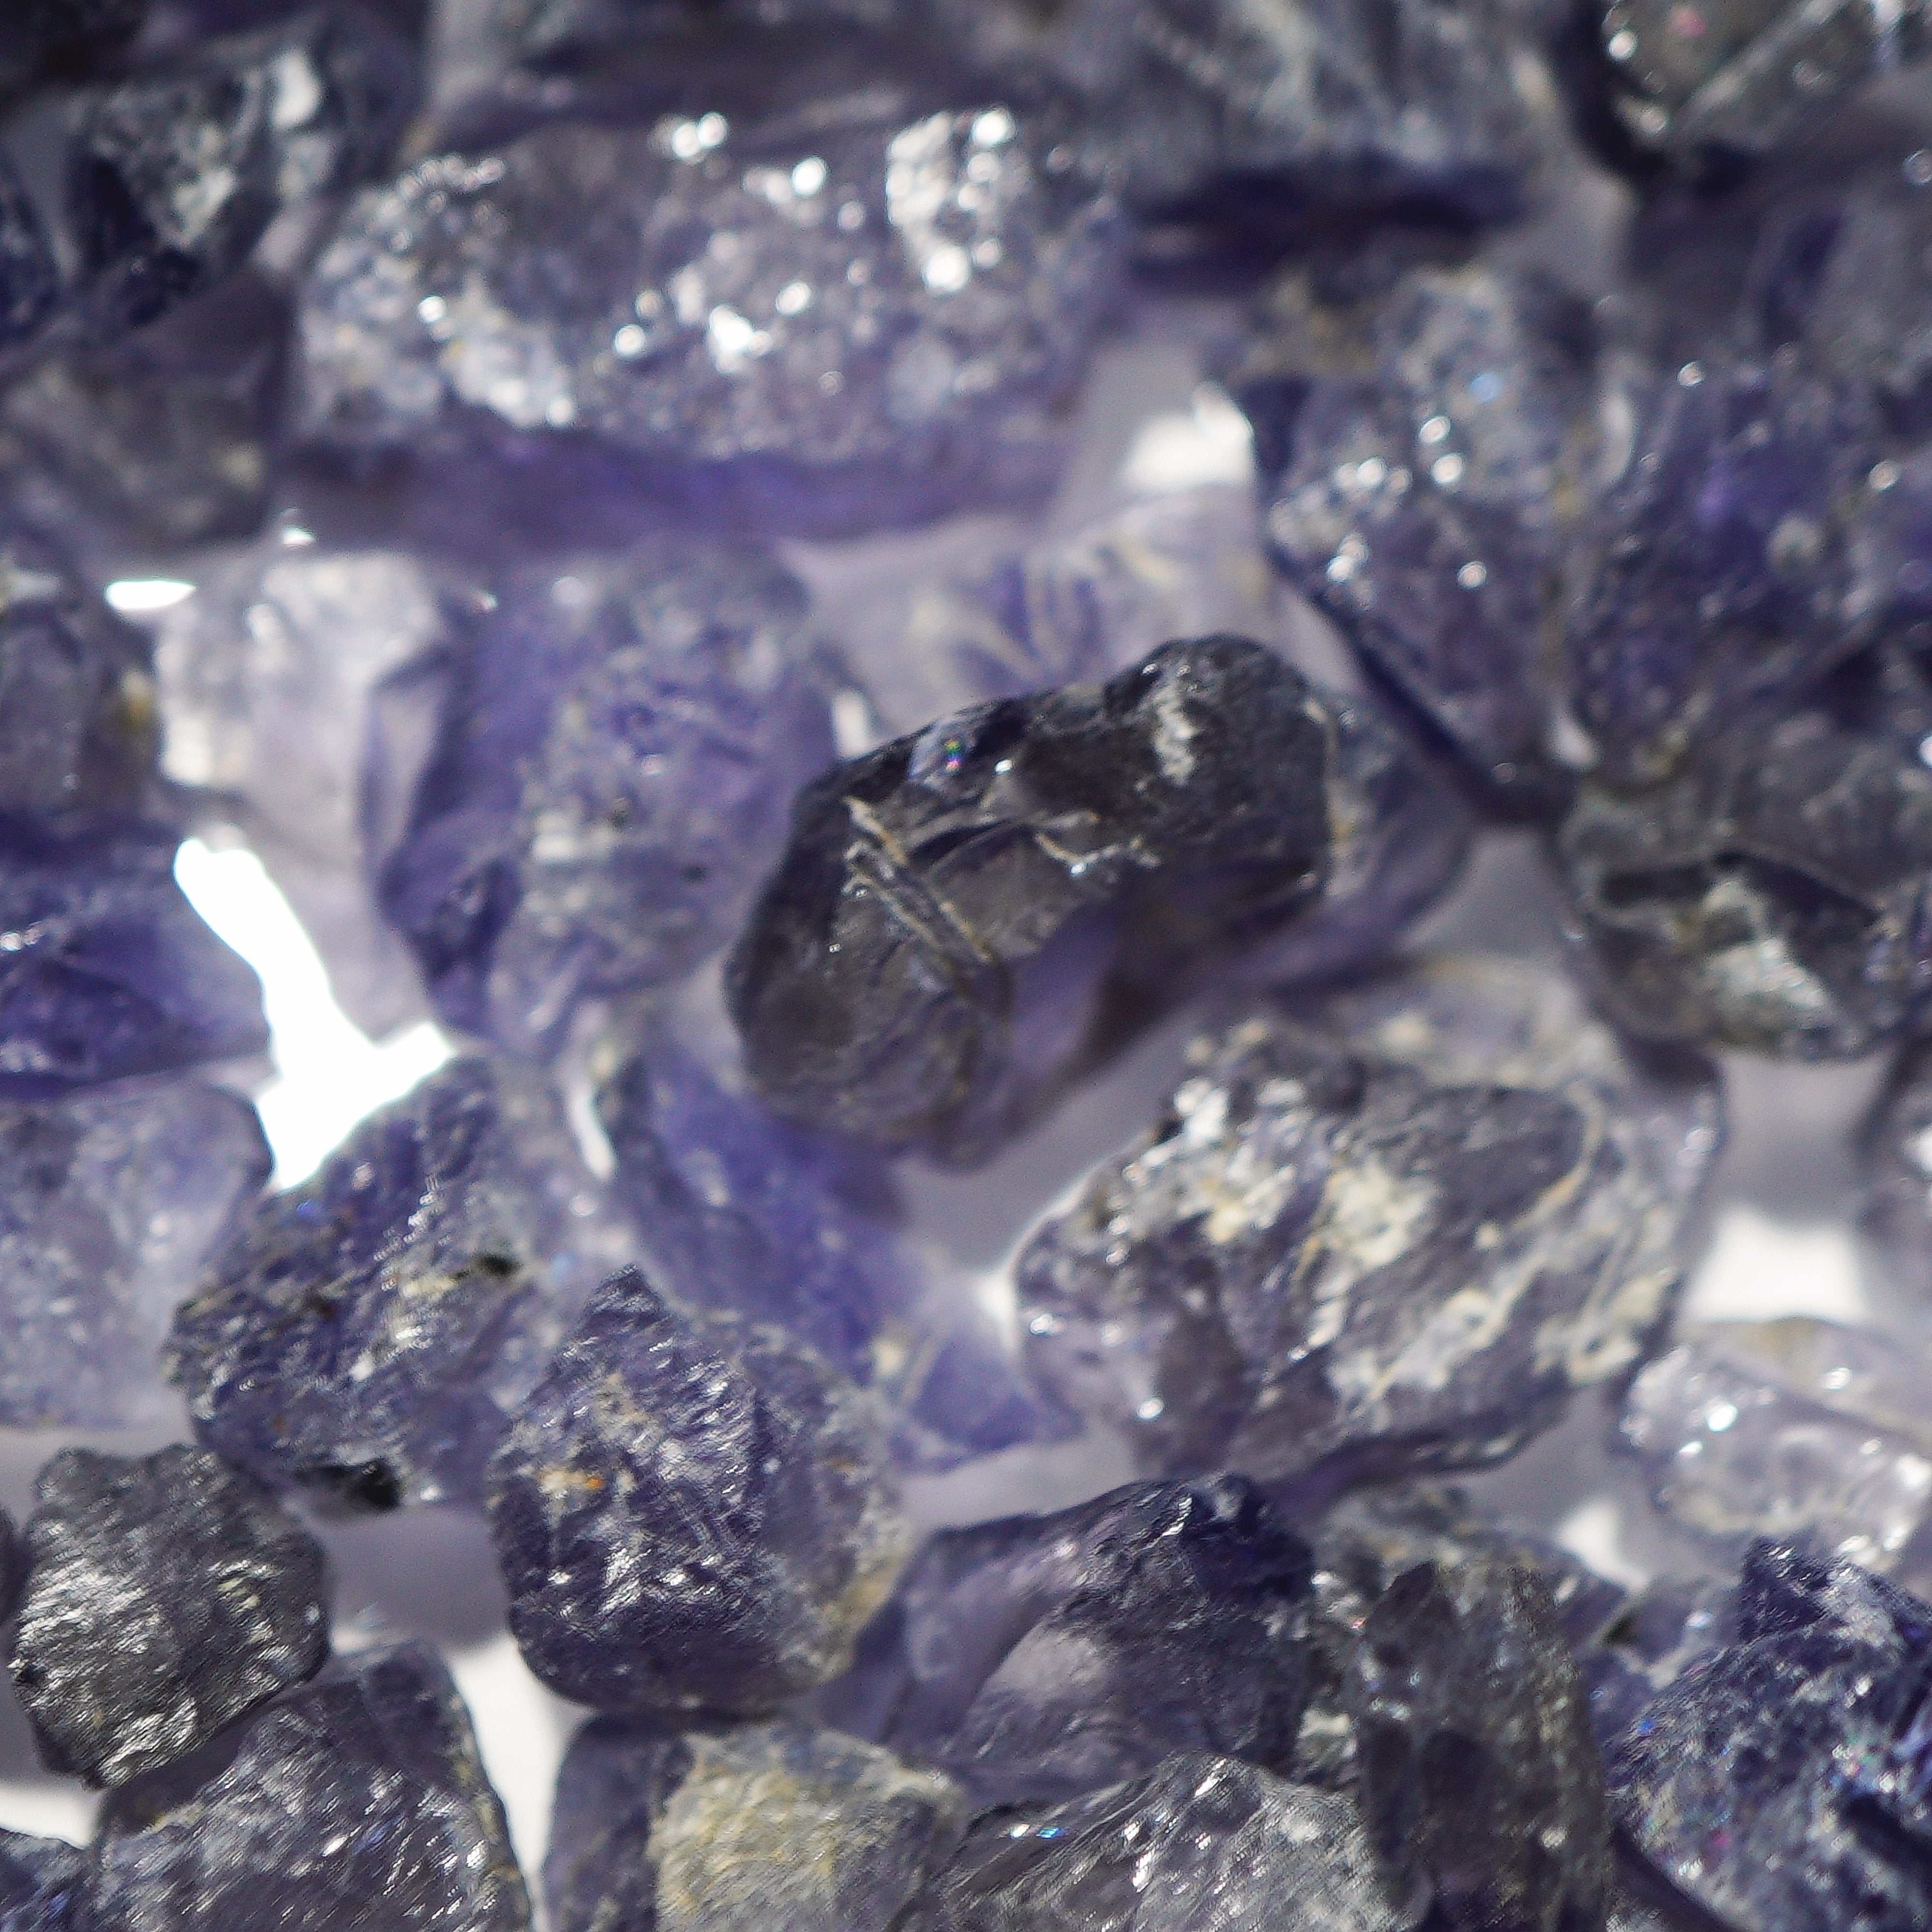 50G Iolite Lots Tanzania Blind Pour Basis 0.2G - 3G Sizes Cab Grade To Bead Rough Buy As Much You